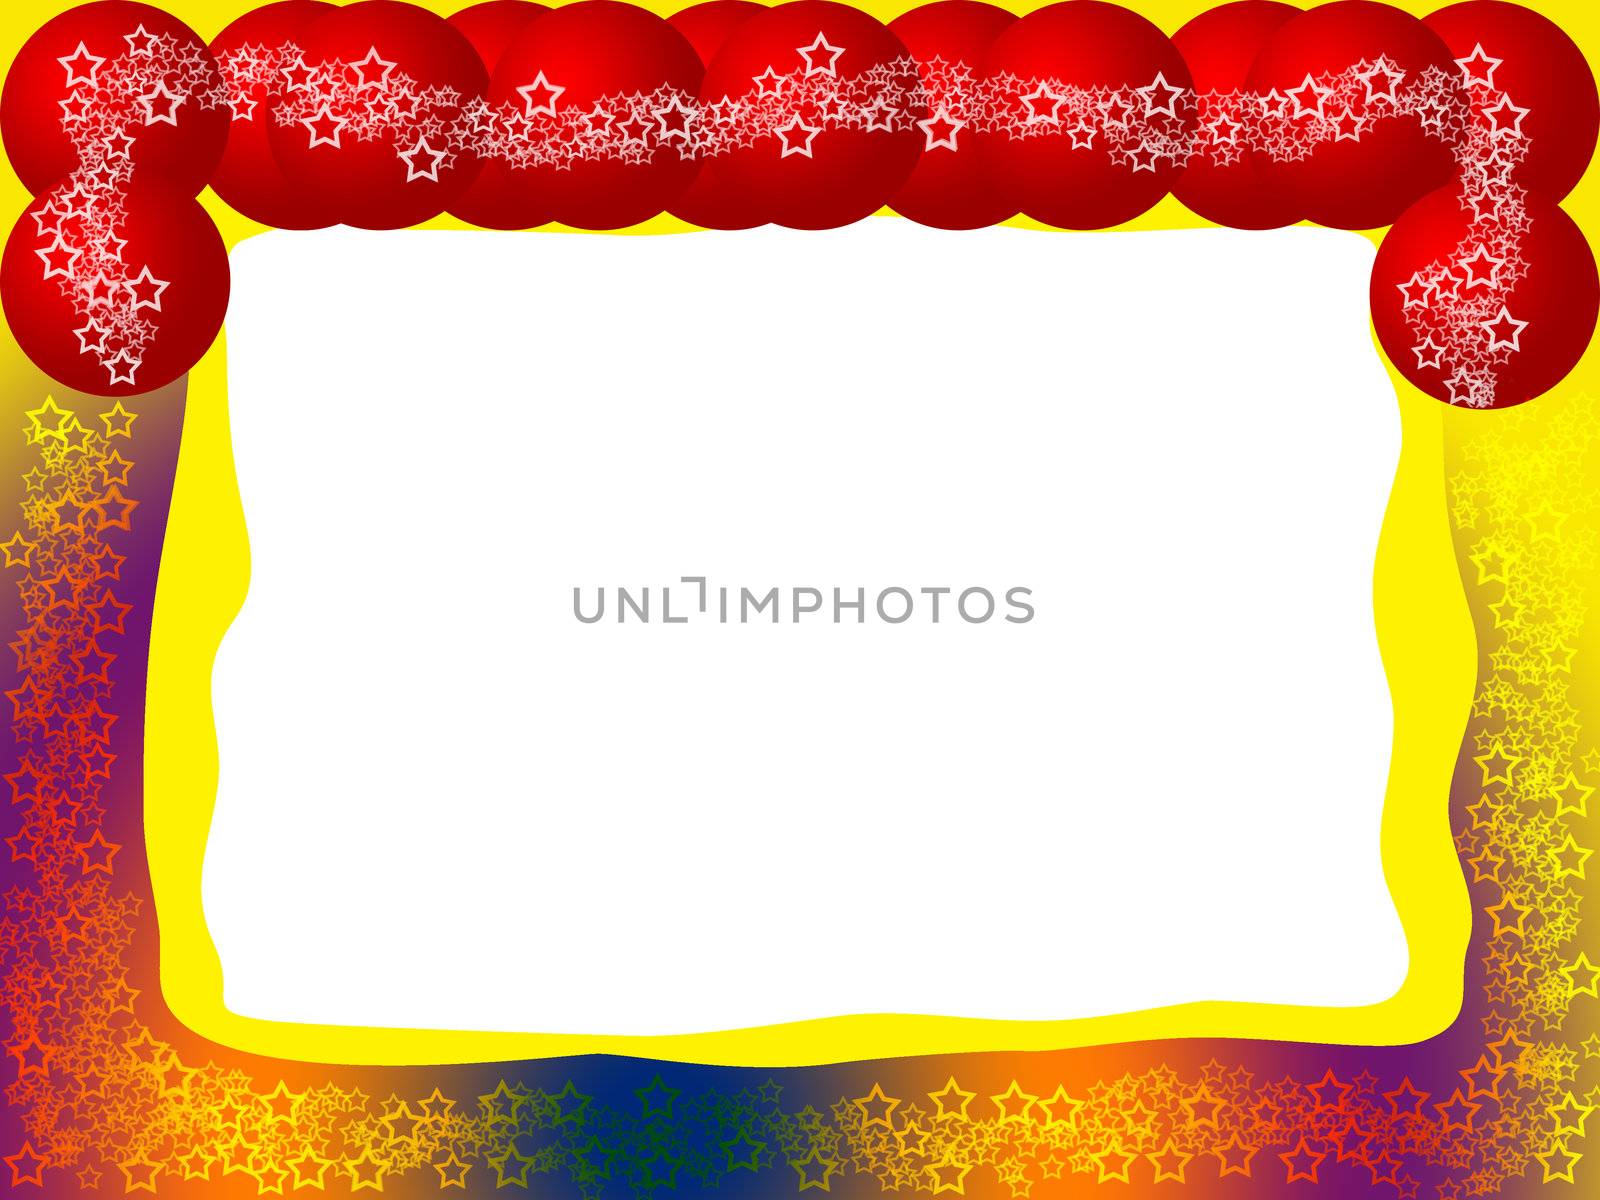 Bright Decorative Festive Colorful Frame with Red Balls, Lacy Stars and Blank White Background